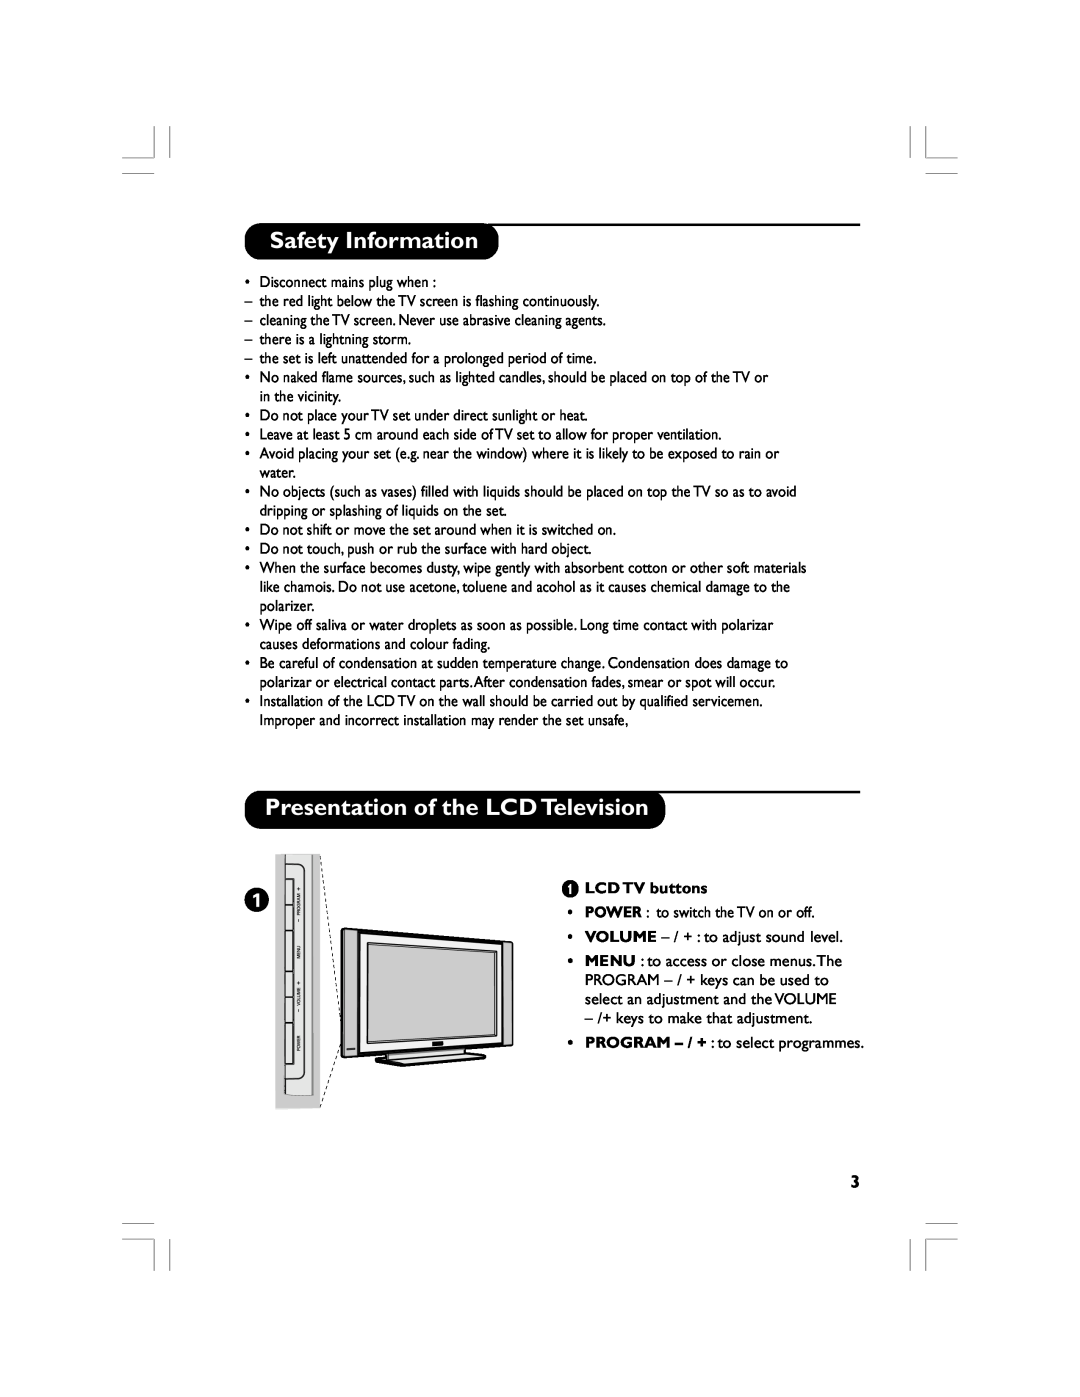 Philips 32PF5520D manual Safety Information, Presentation of the LCD Television, LCD TV buttons 